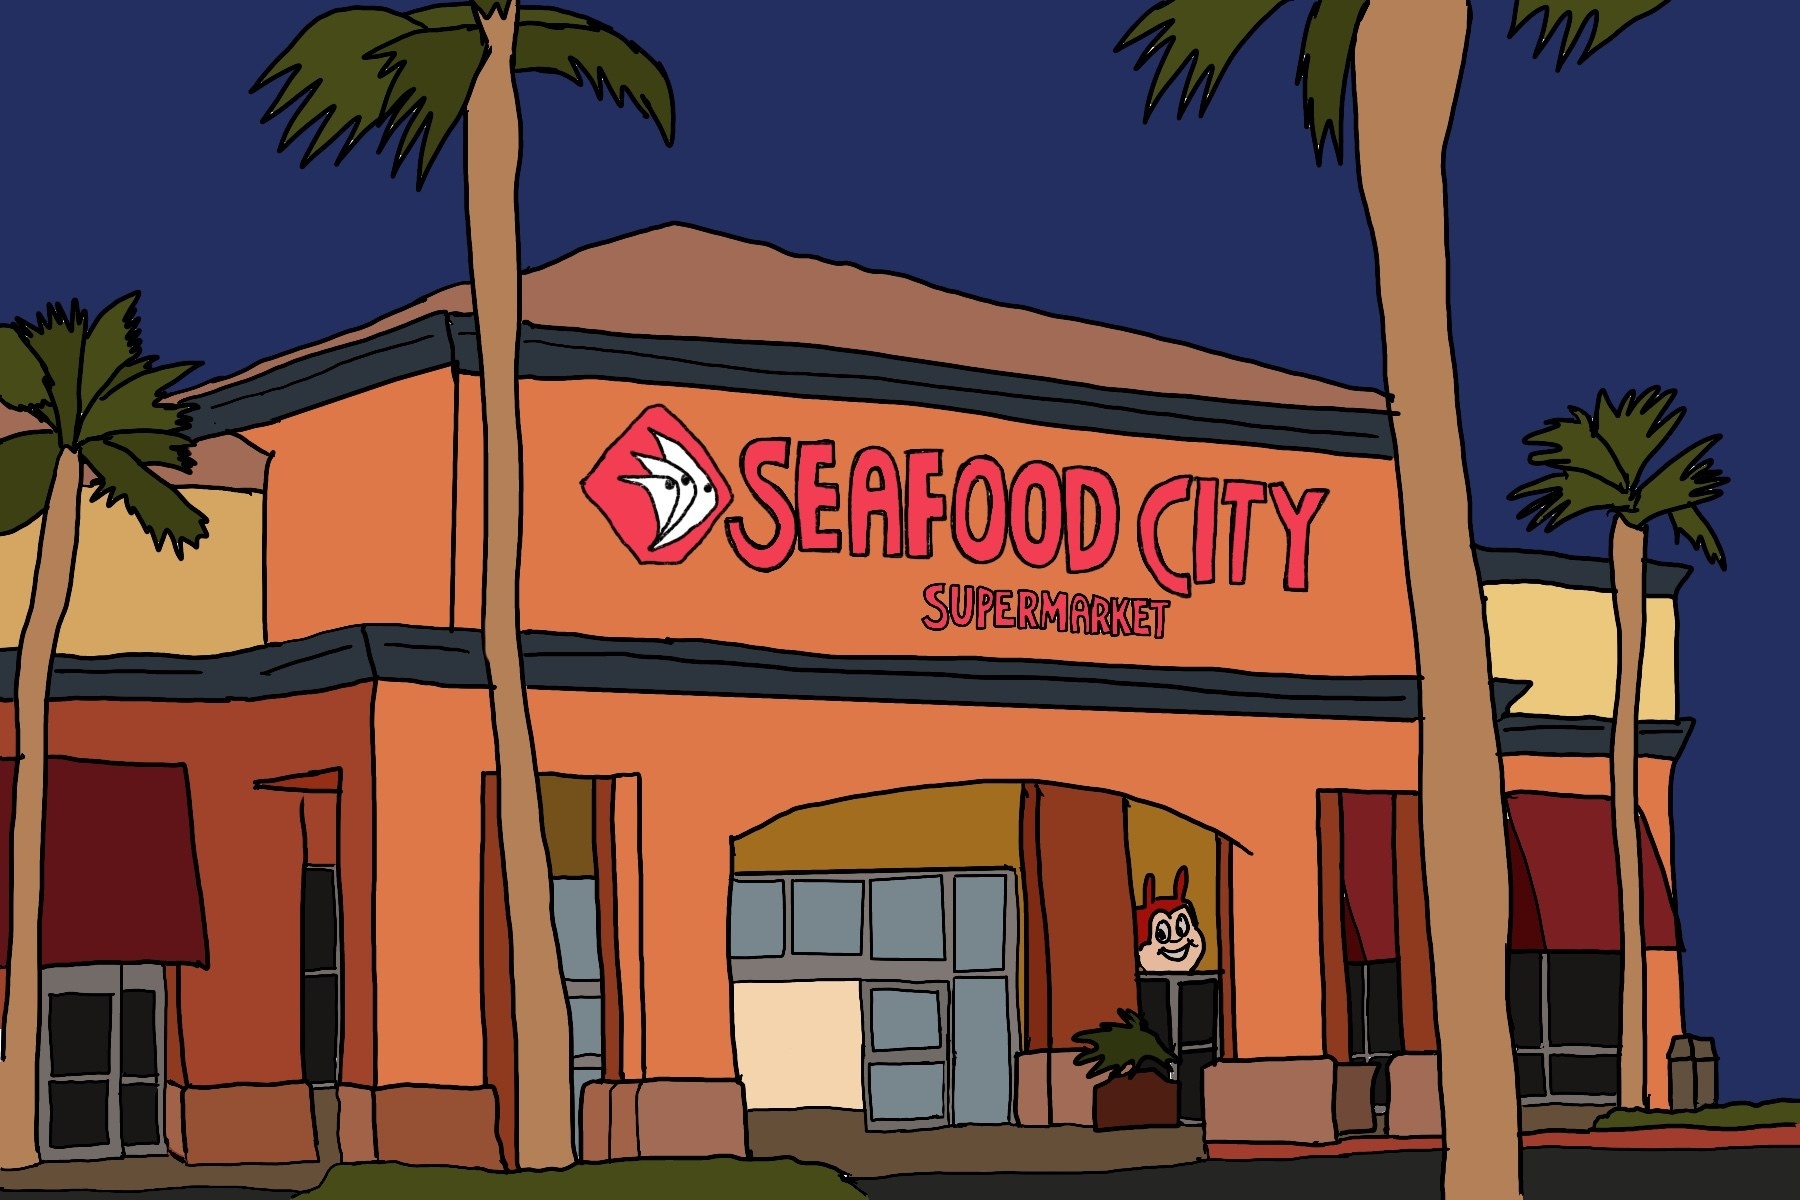 Illustration of grocery store Seafood City in Las Vegas